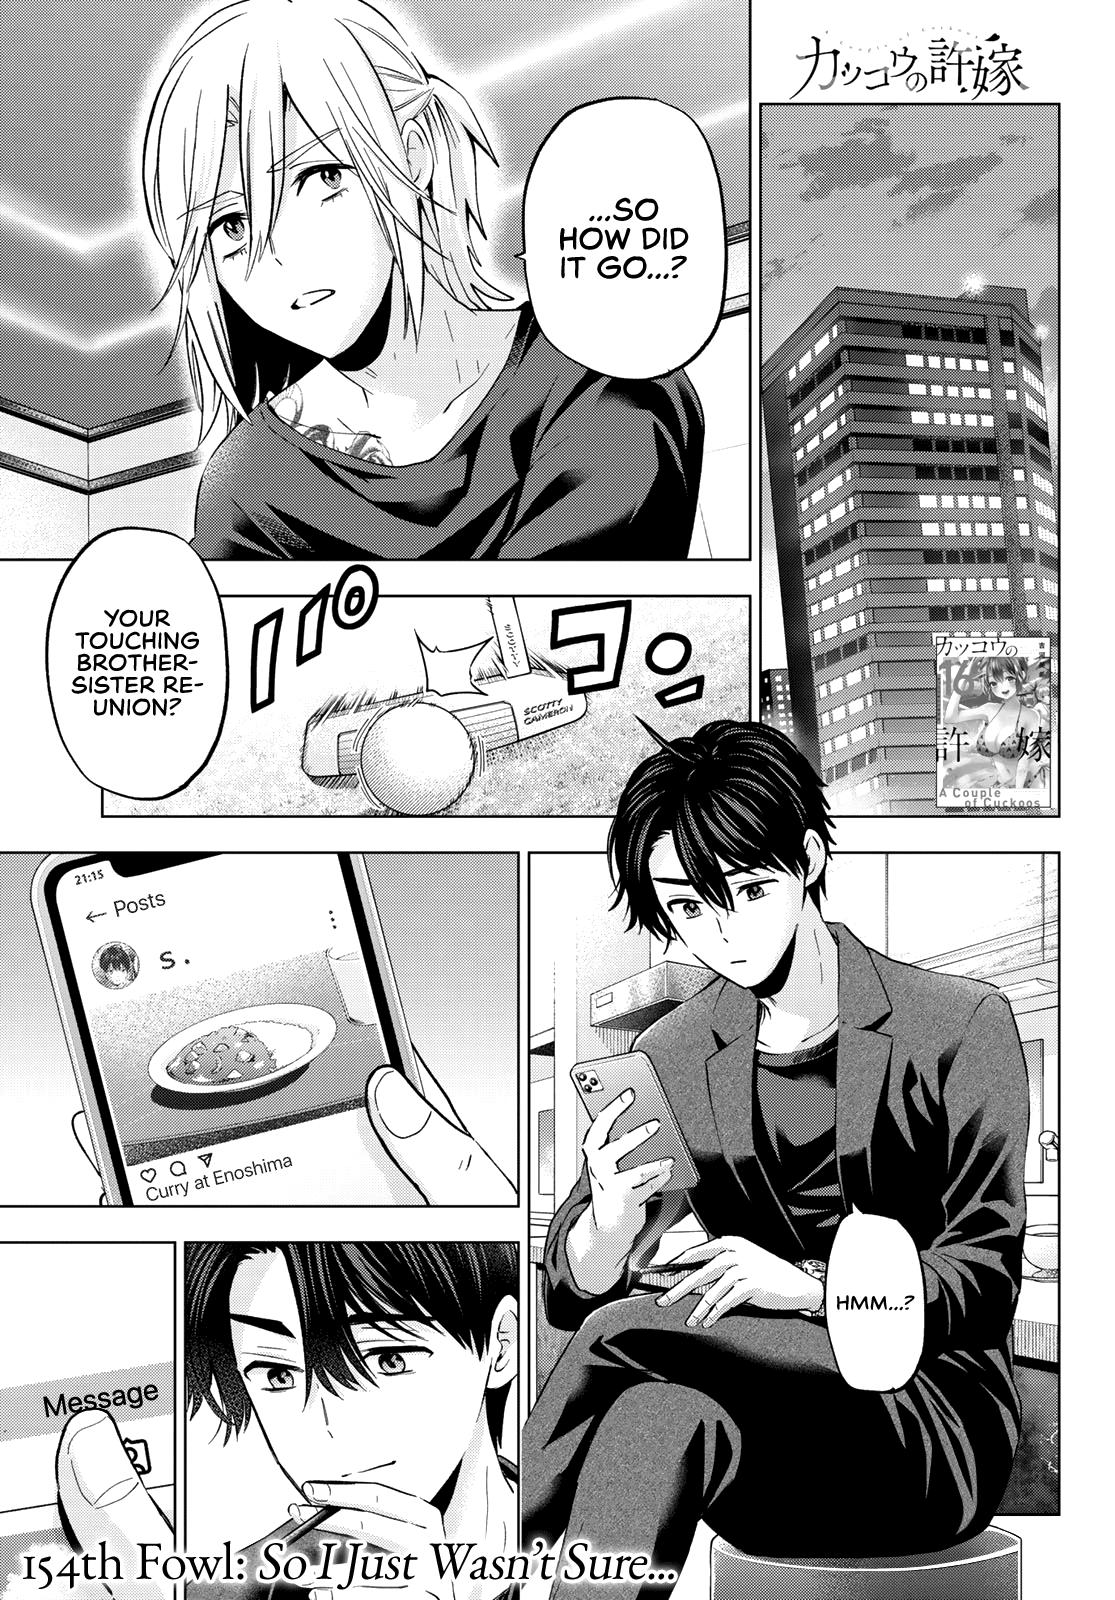 Read Manga A Couple of Cuckoos - Chapter 135